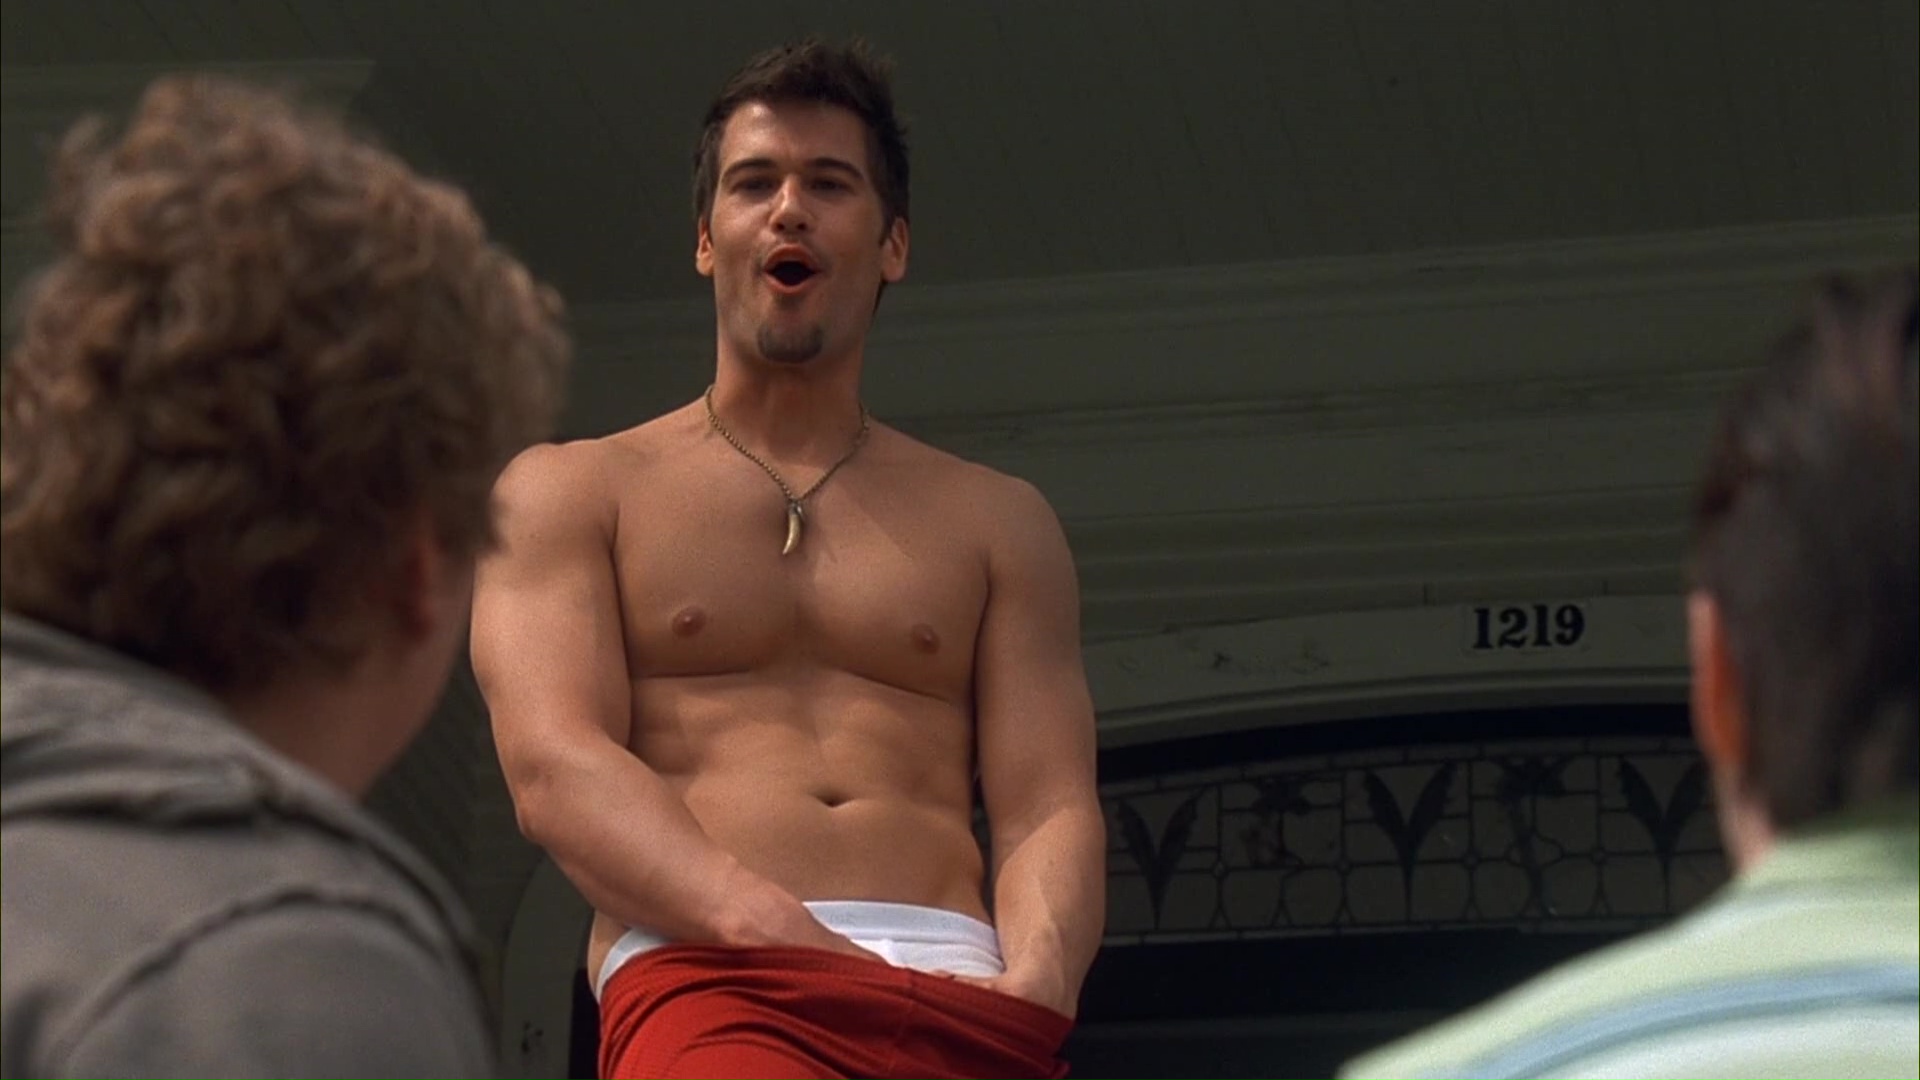 auscaps nick zano shirtless college 1920x1080 here with full size. auscaps